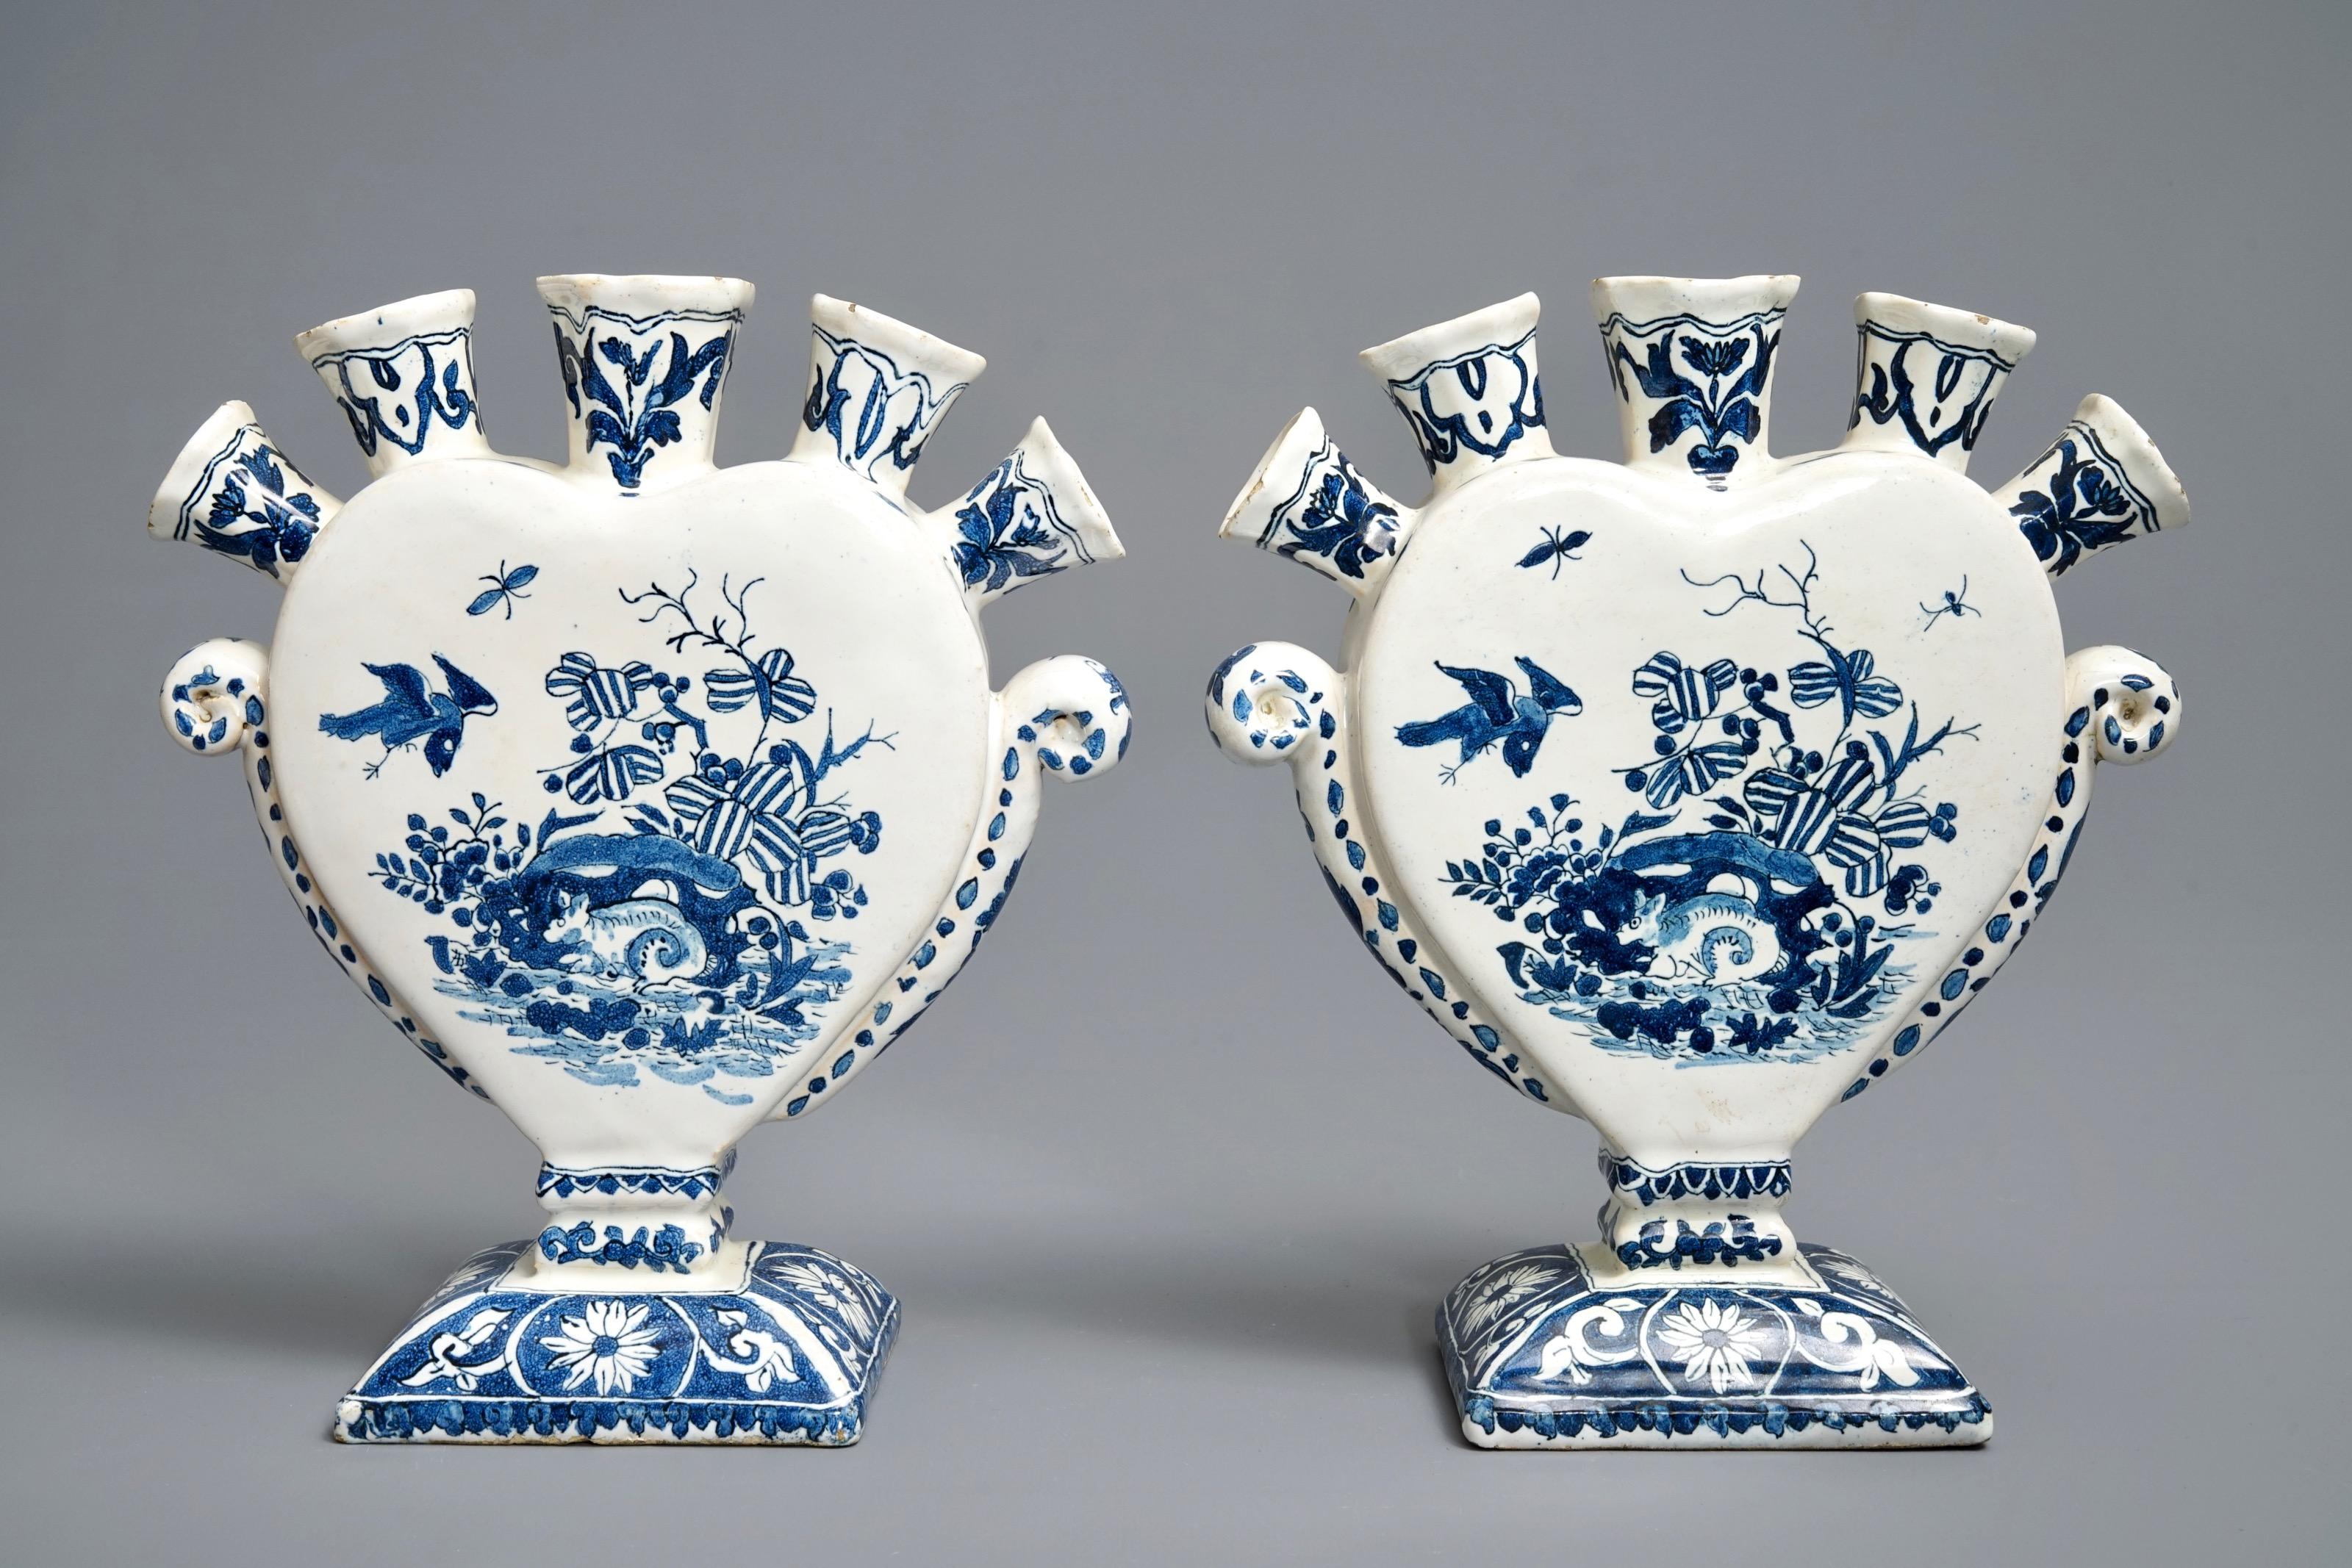 Pair of Heart-Shaped Tulip Vases or Tulipieres, 19th Century